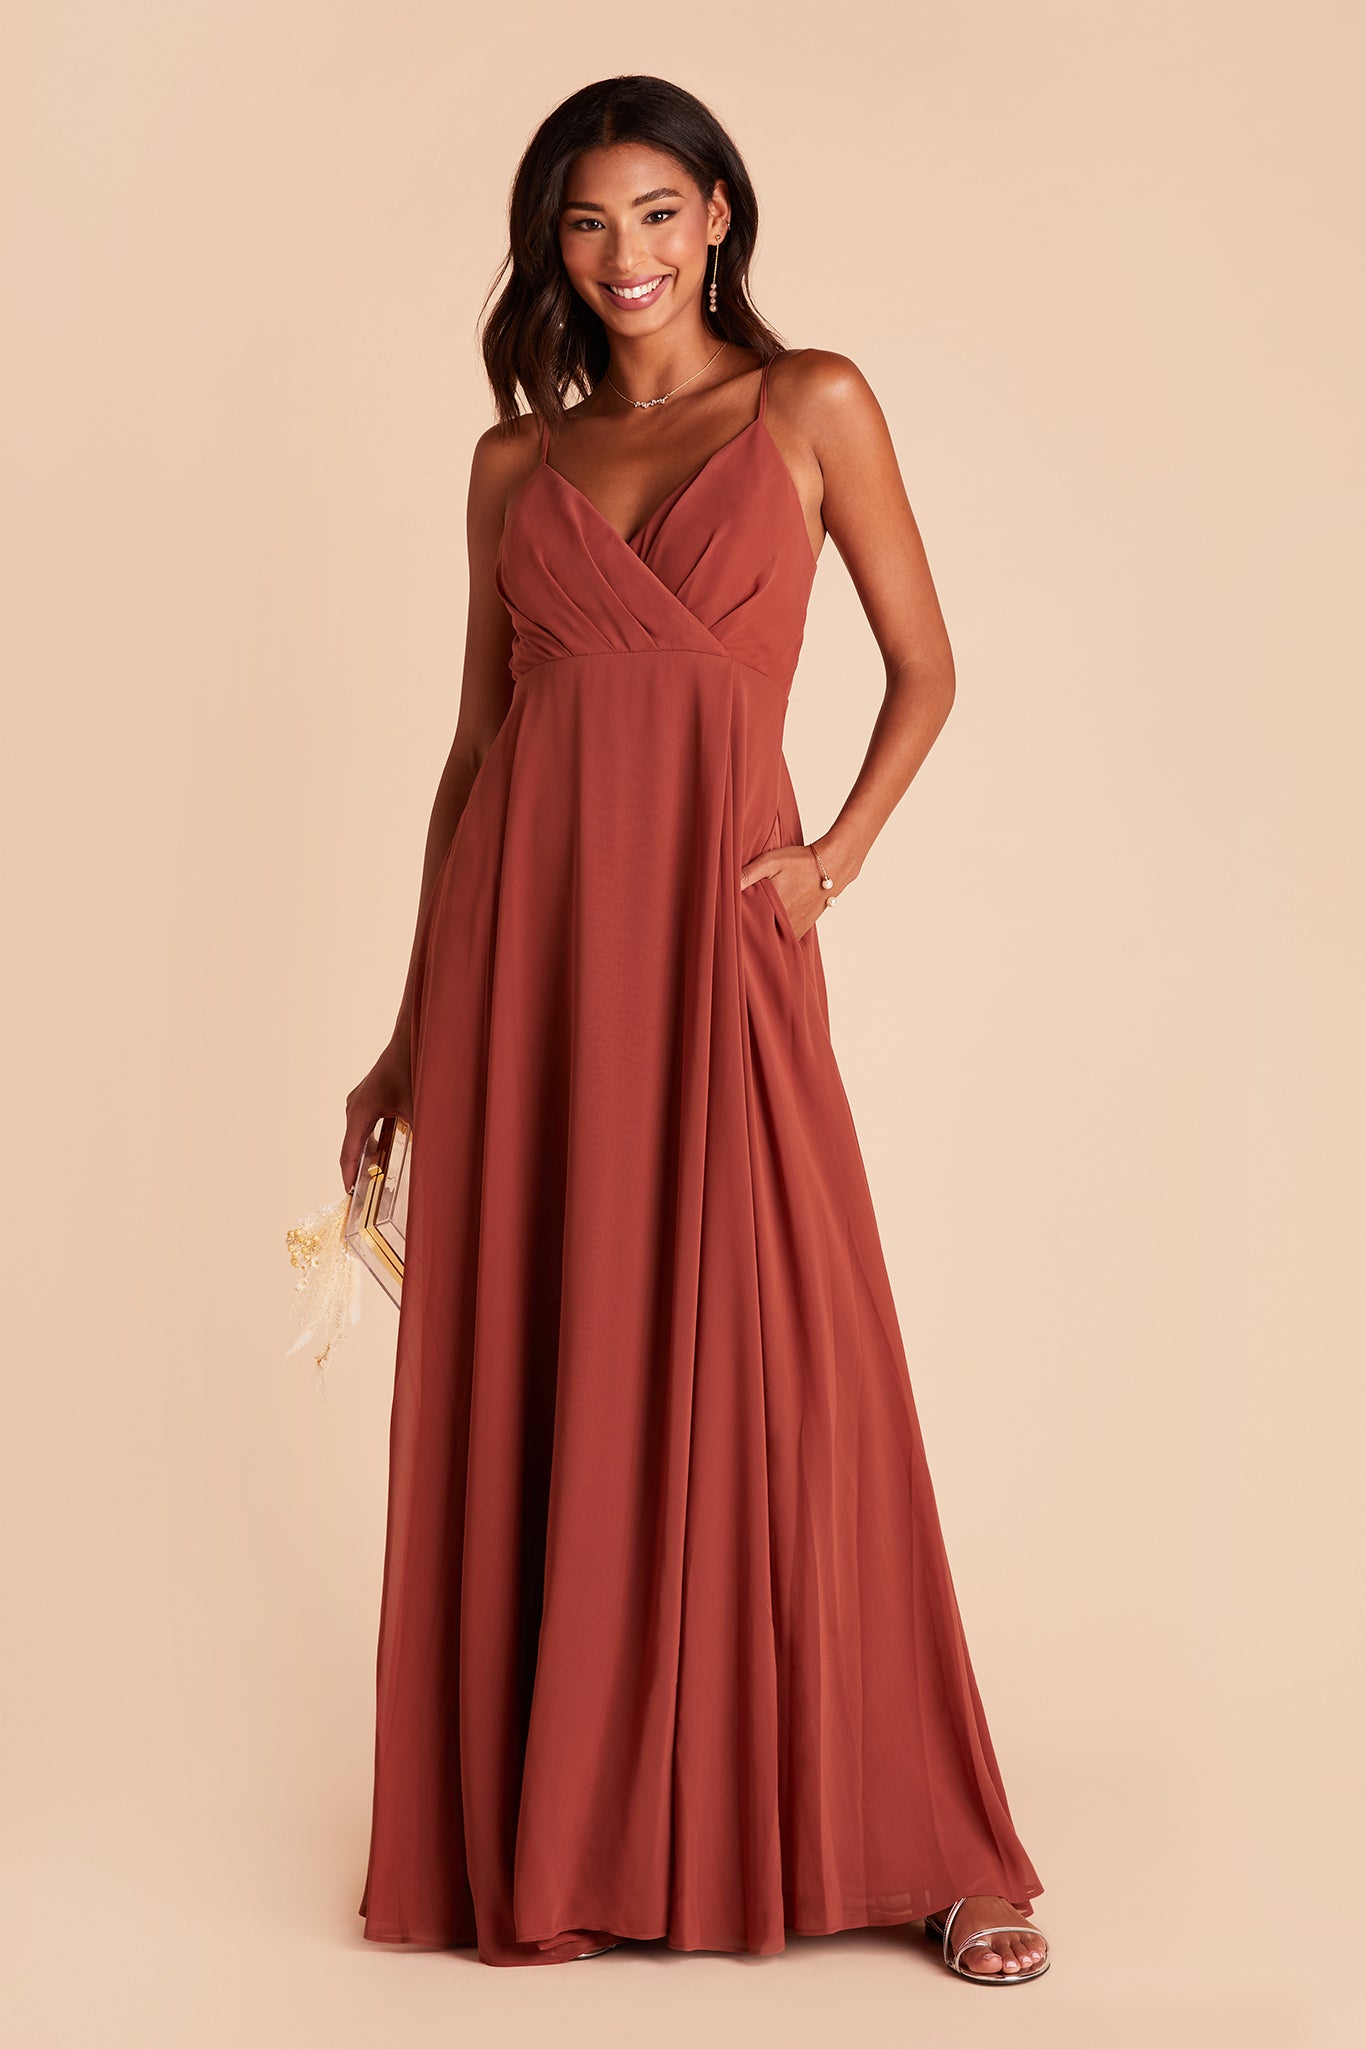 Kaia bridesmaid dress with pocket in spice chiffon by Birdy Grey, front view